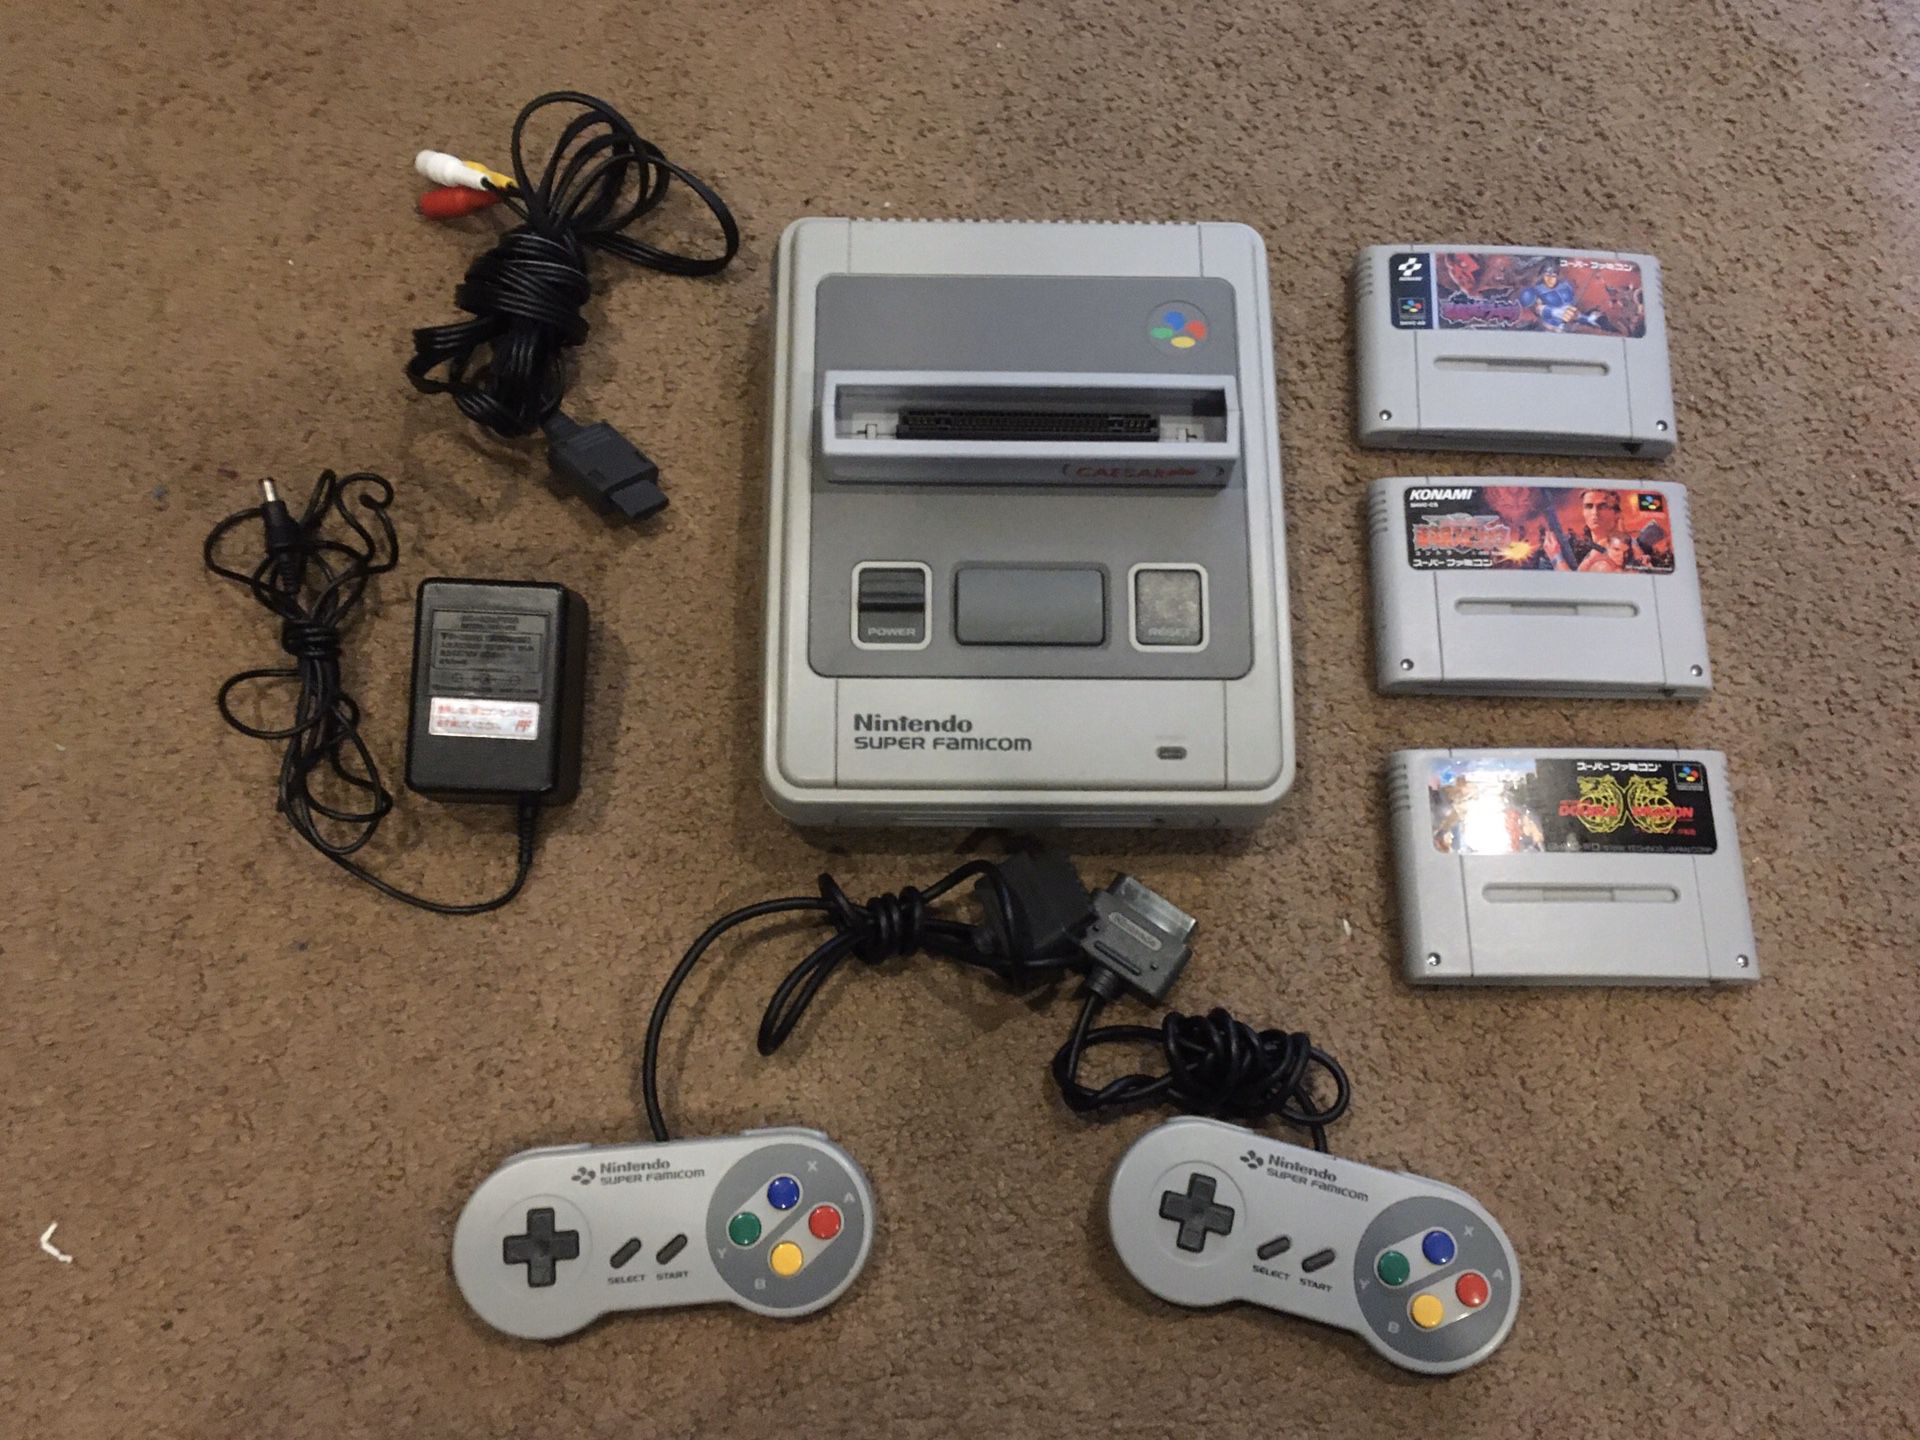 Super Nintendo SNES famicom japan import with games and 2 controllers, converter all OEM